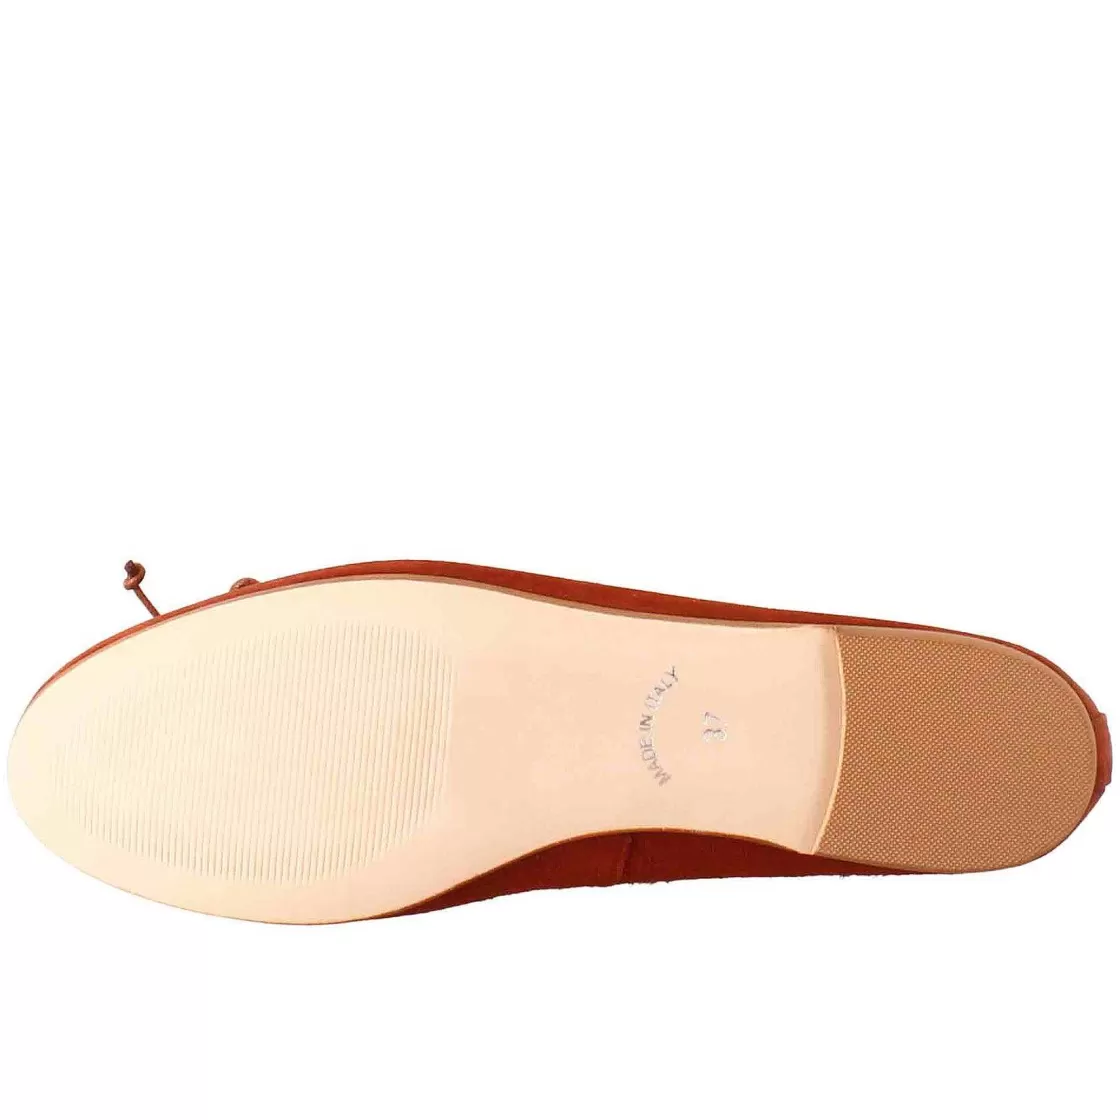 Leonardo Light Brick-Colored Women'S Ballet Flats In Suede Without Lining Best